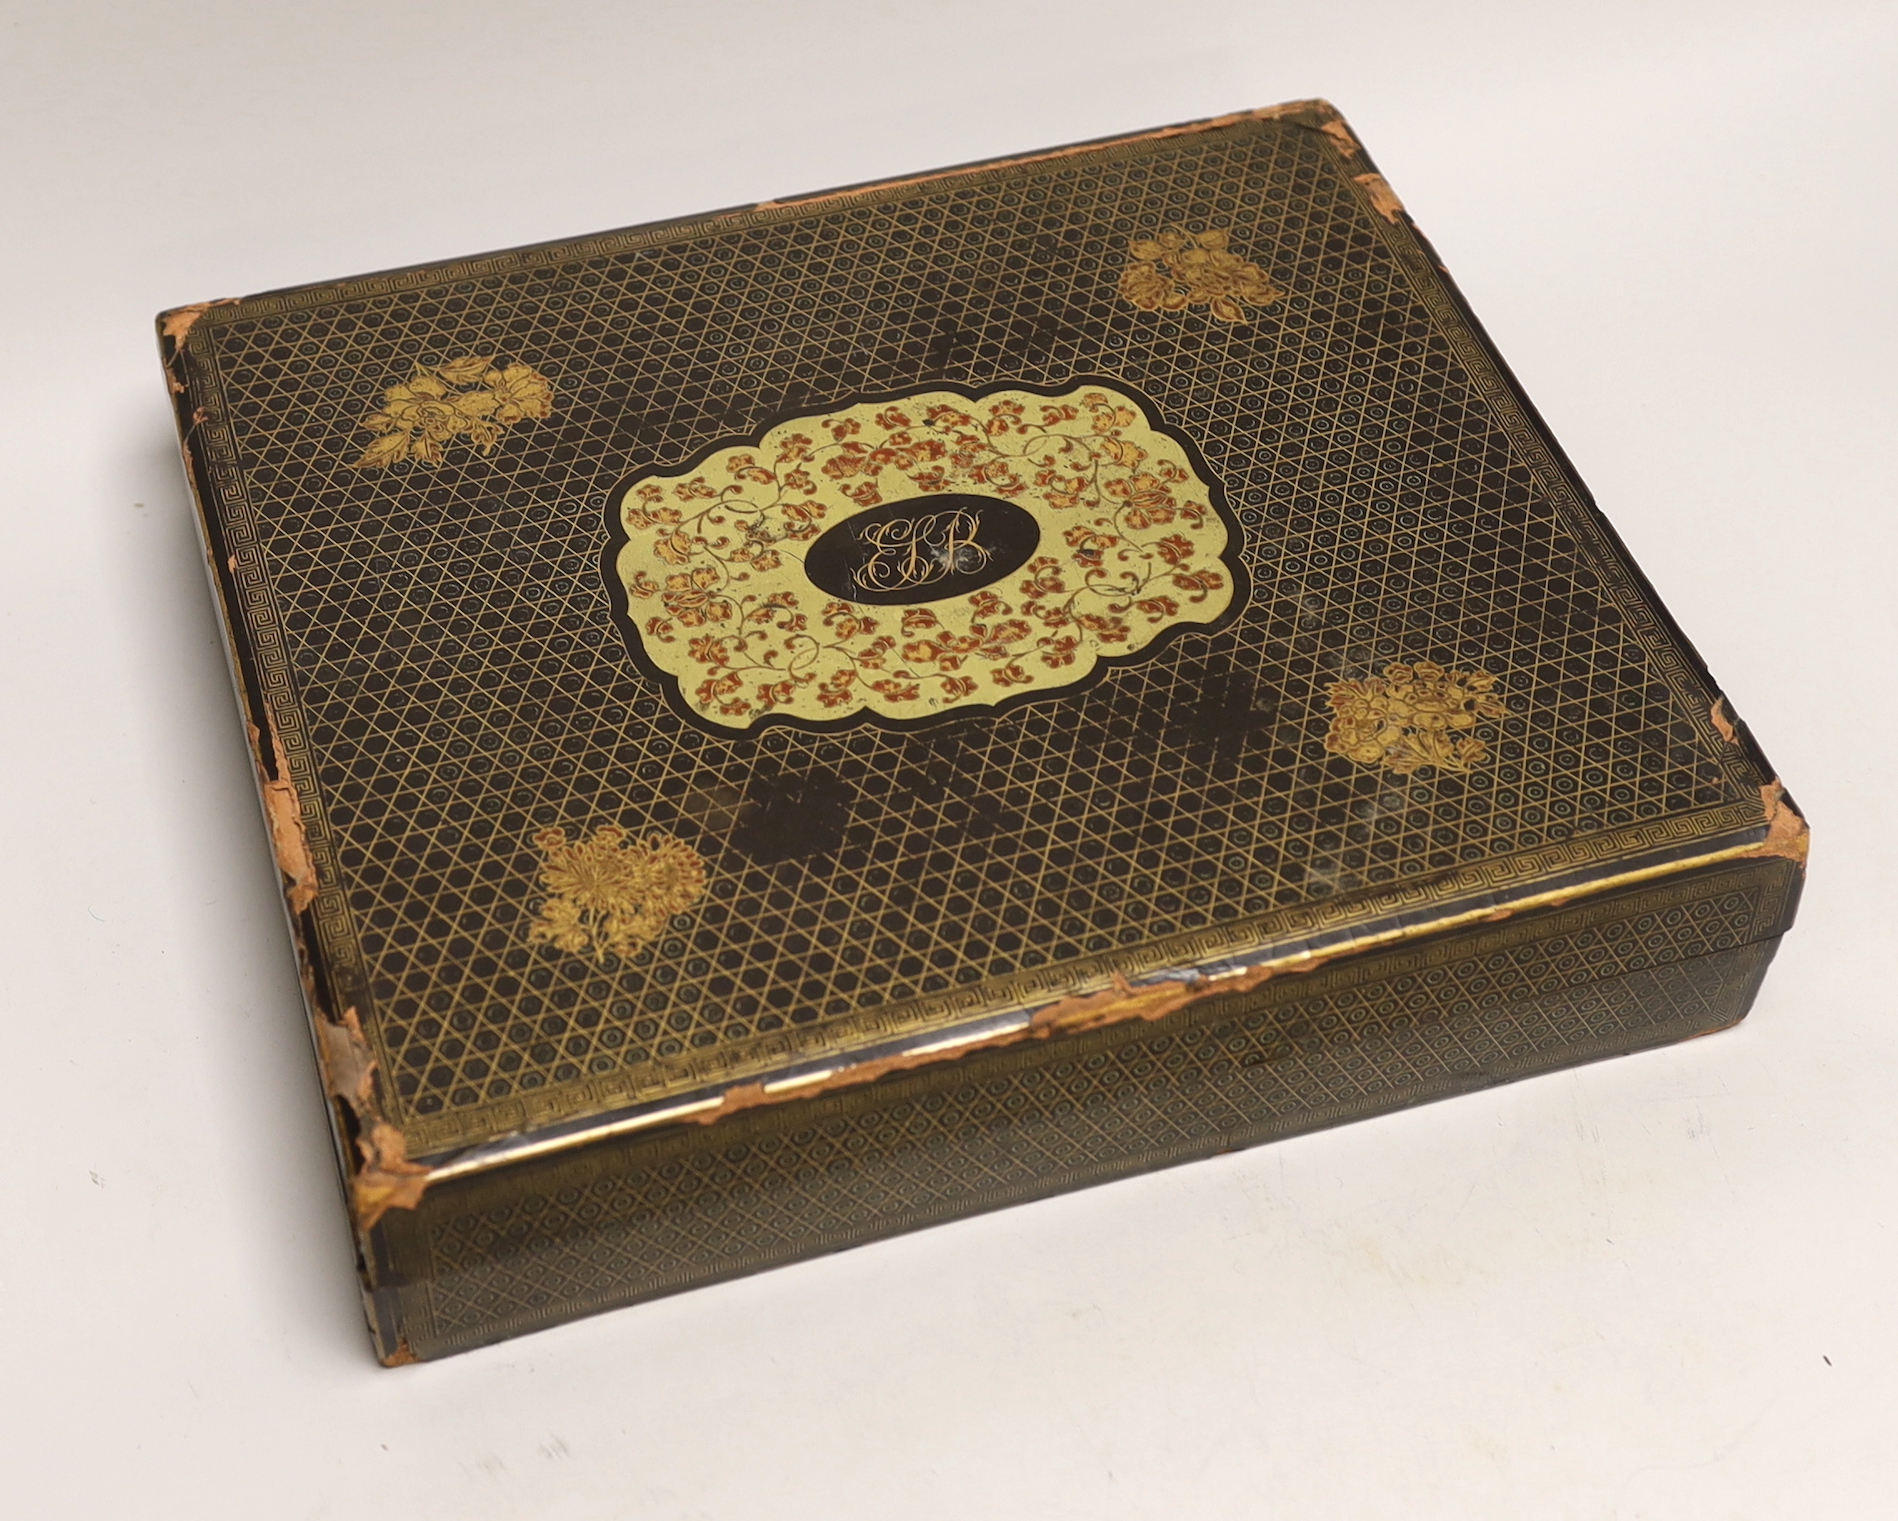 A Victorian gaming set with mother of pearl counters, contained in a mid 19th century Canton gilt decorated like a box with lidded containers, 29cm